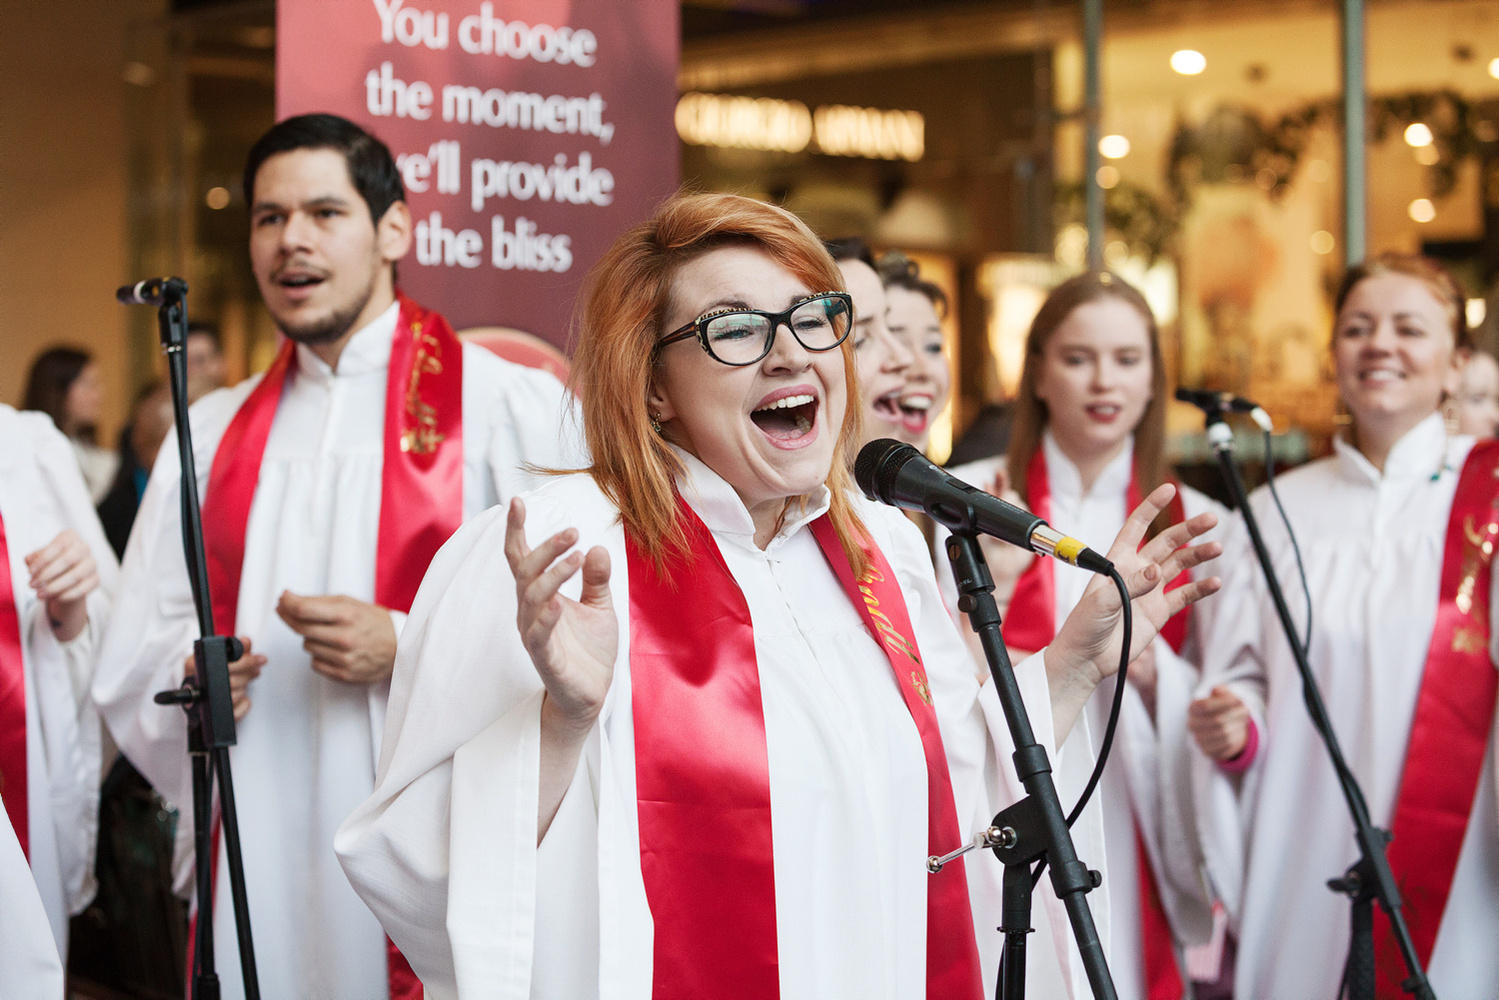 Gospel singers wearing branded red silk scarves at Lindt Chocolate Christmas seasonal promotional event in Dundrum Town Centre. PR event photographer Dublin